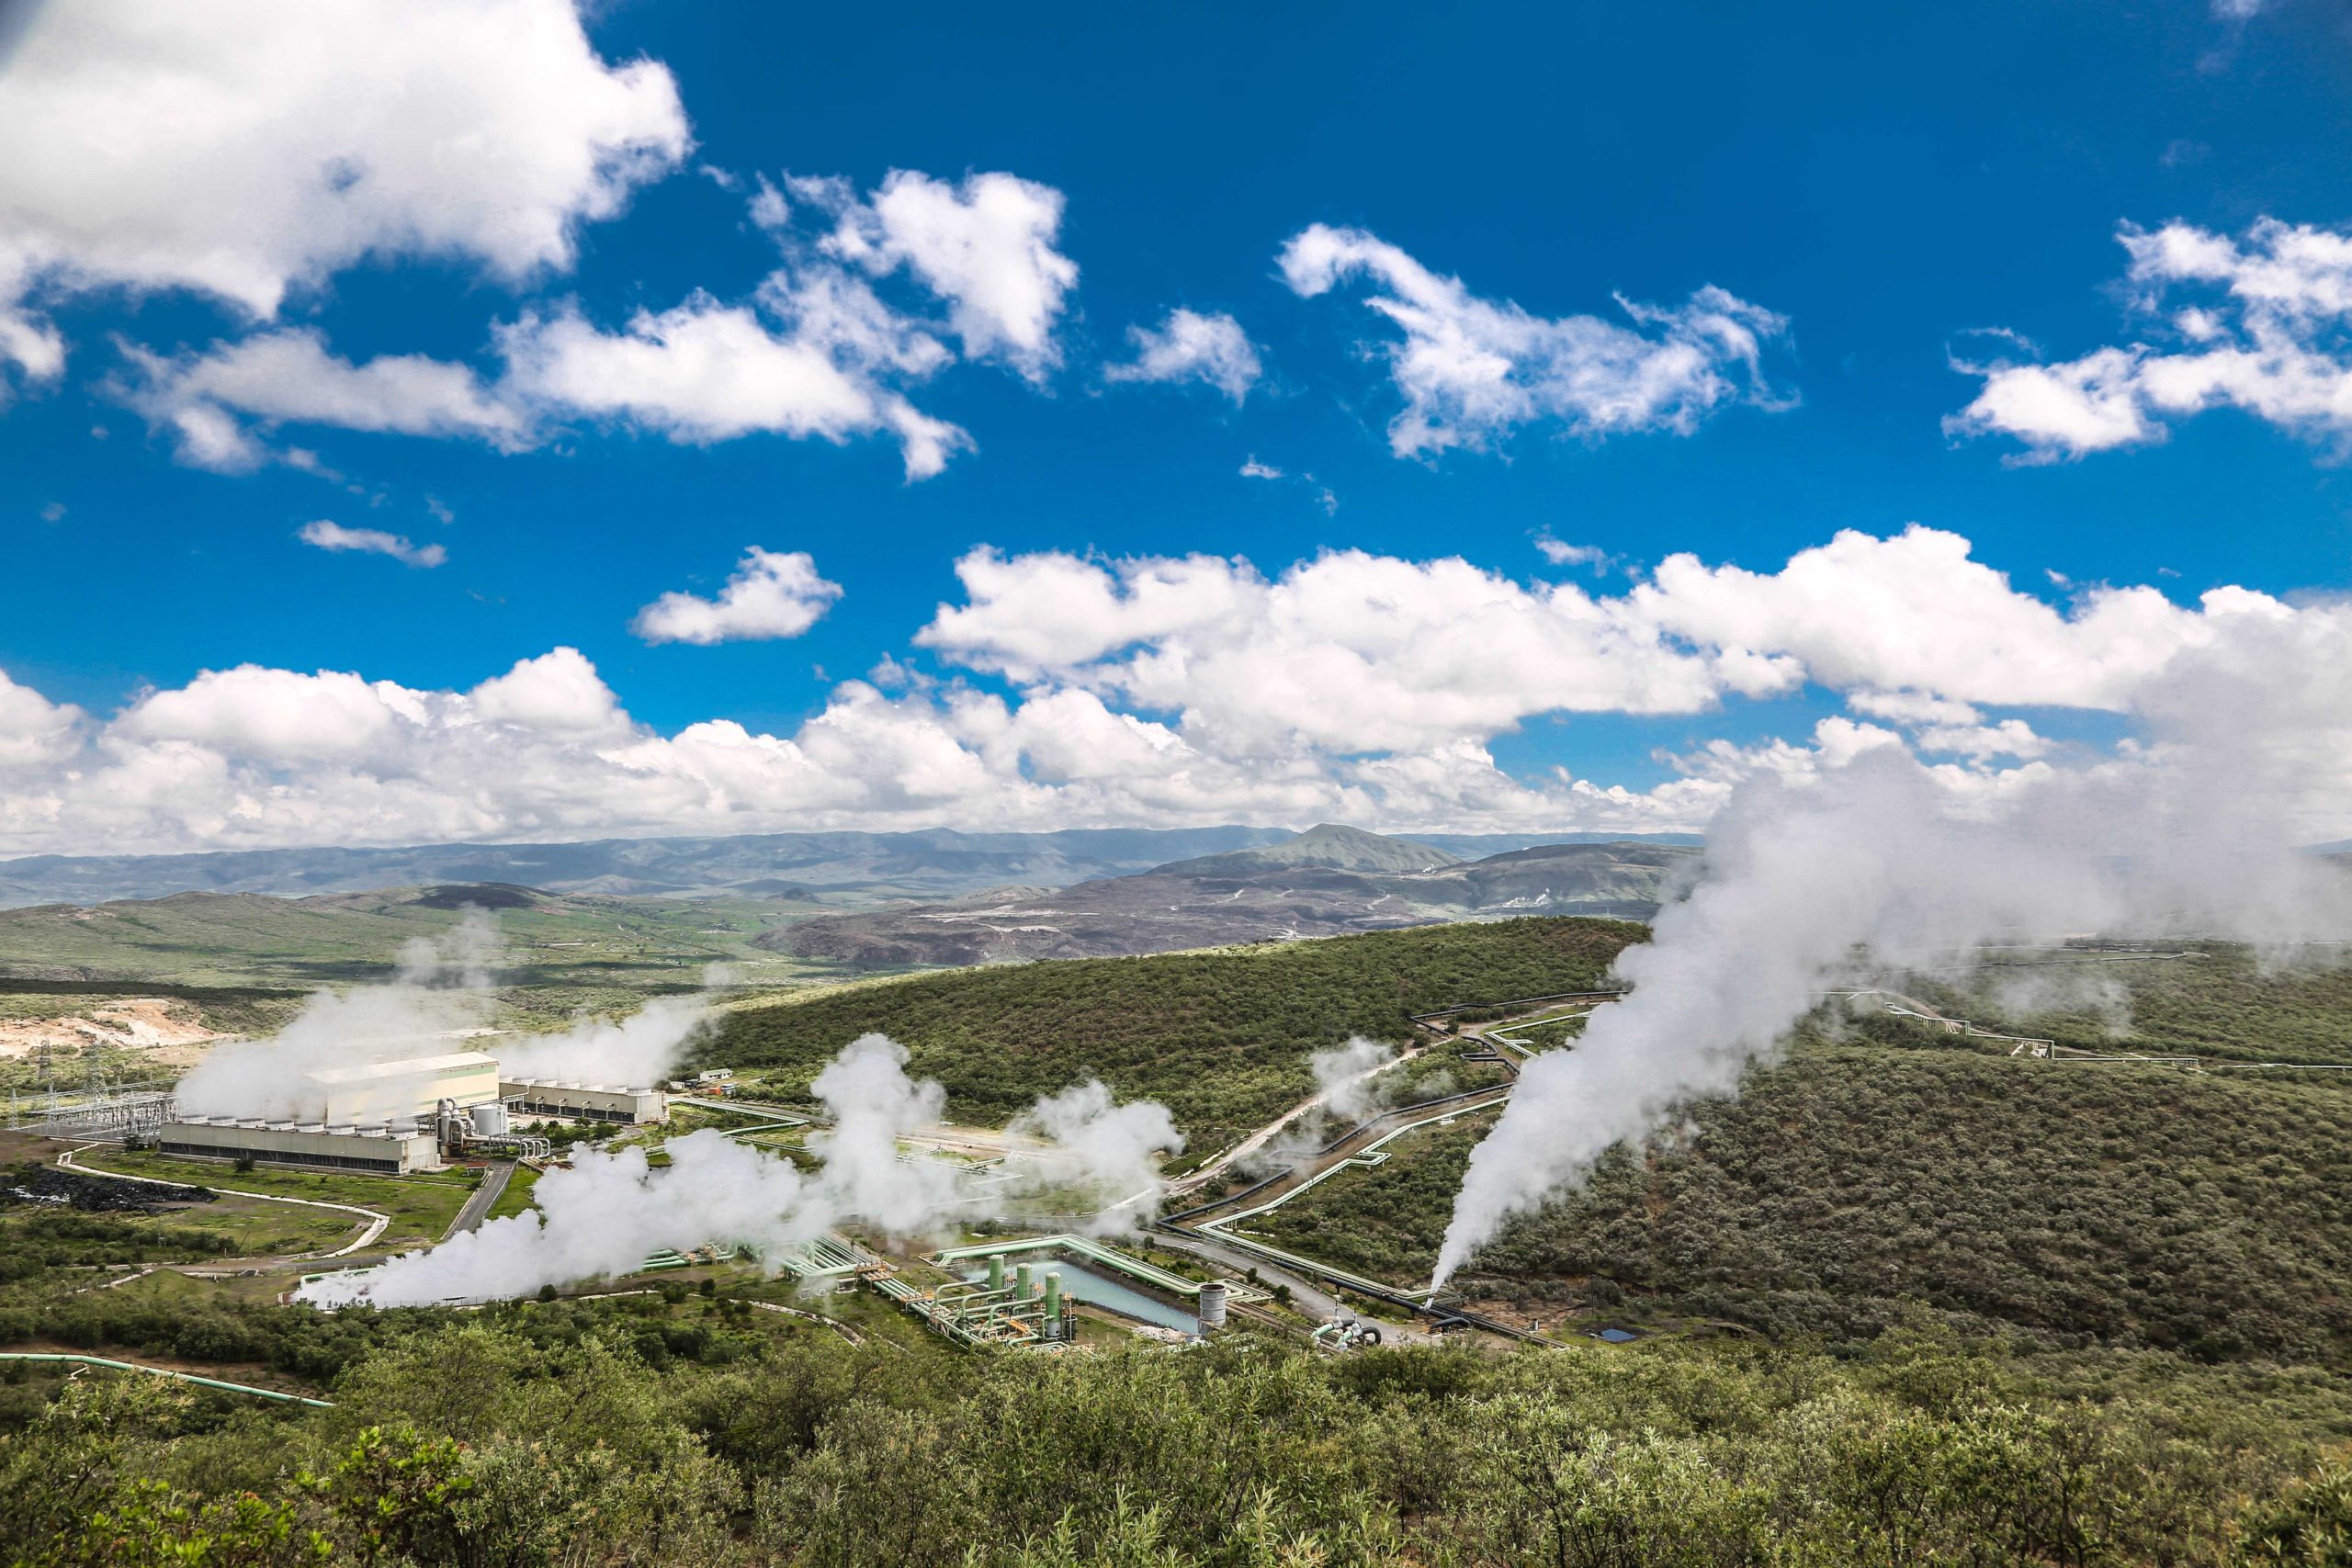 KenGen clinches Sh709mn deal to drill geothermal wells in Djibouti